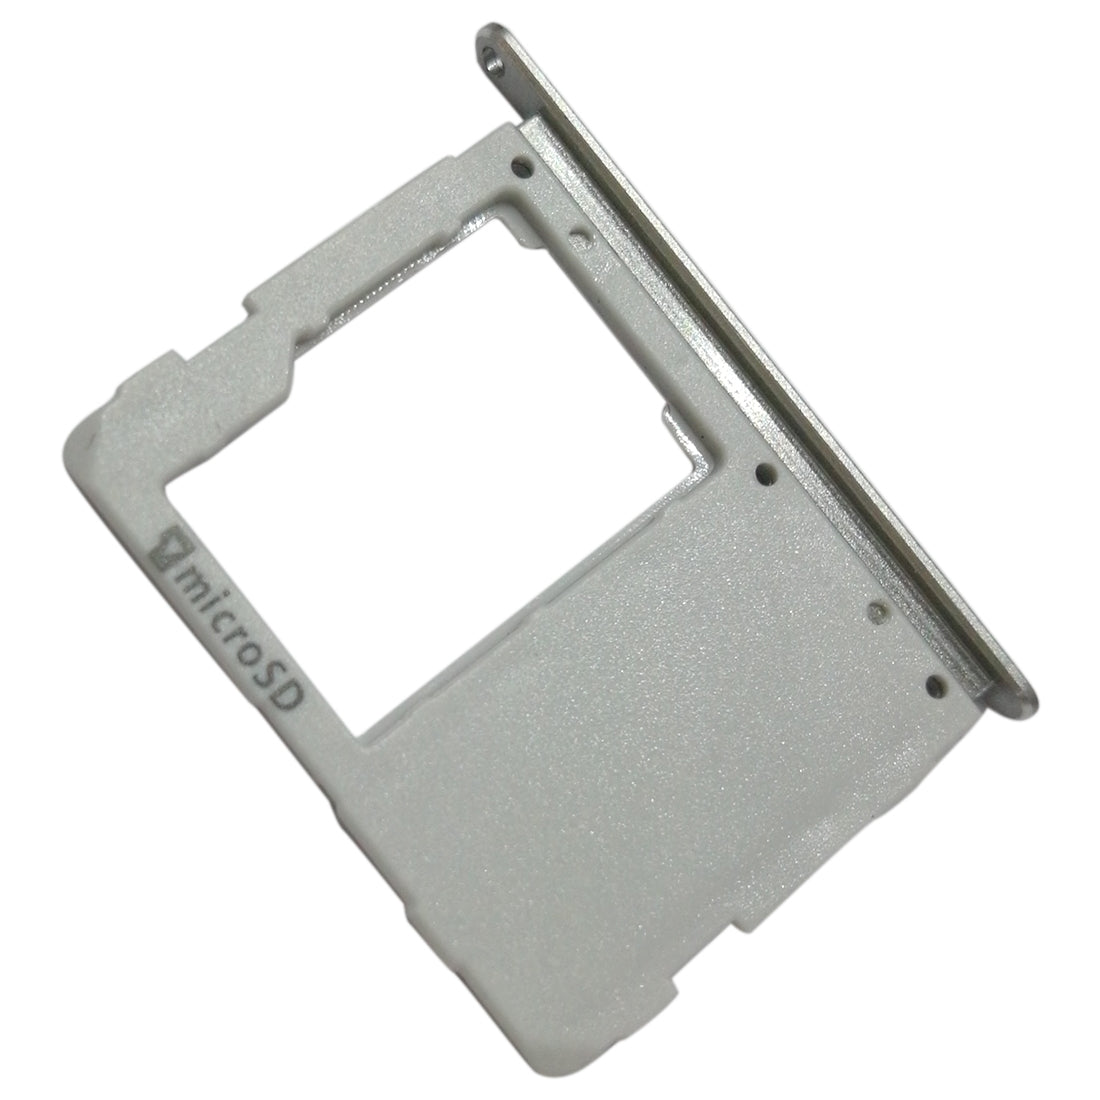 Support Plateau Micro SD Samsung Galaxy Tab S3 9.7 / T820 WIFI Argent